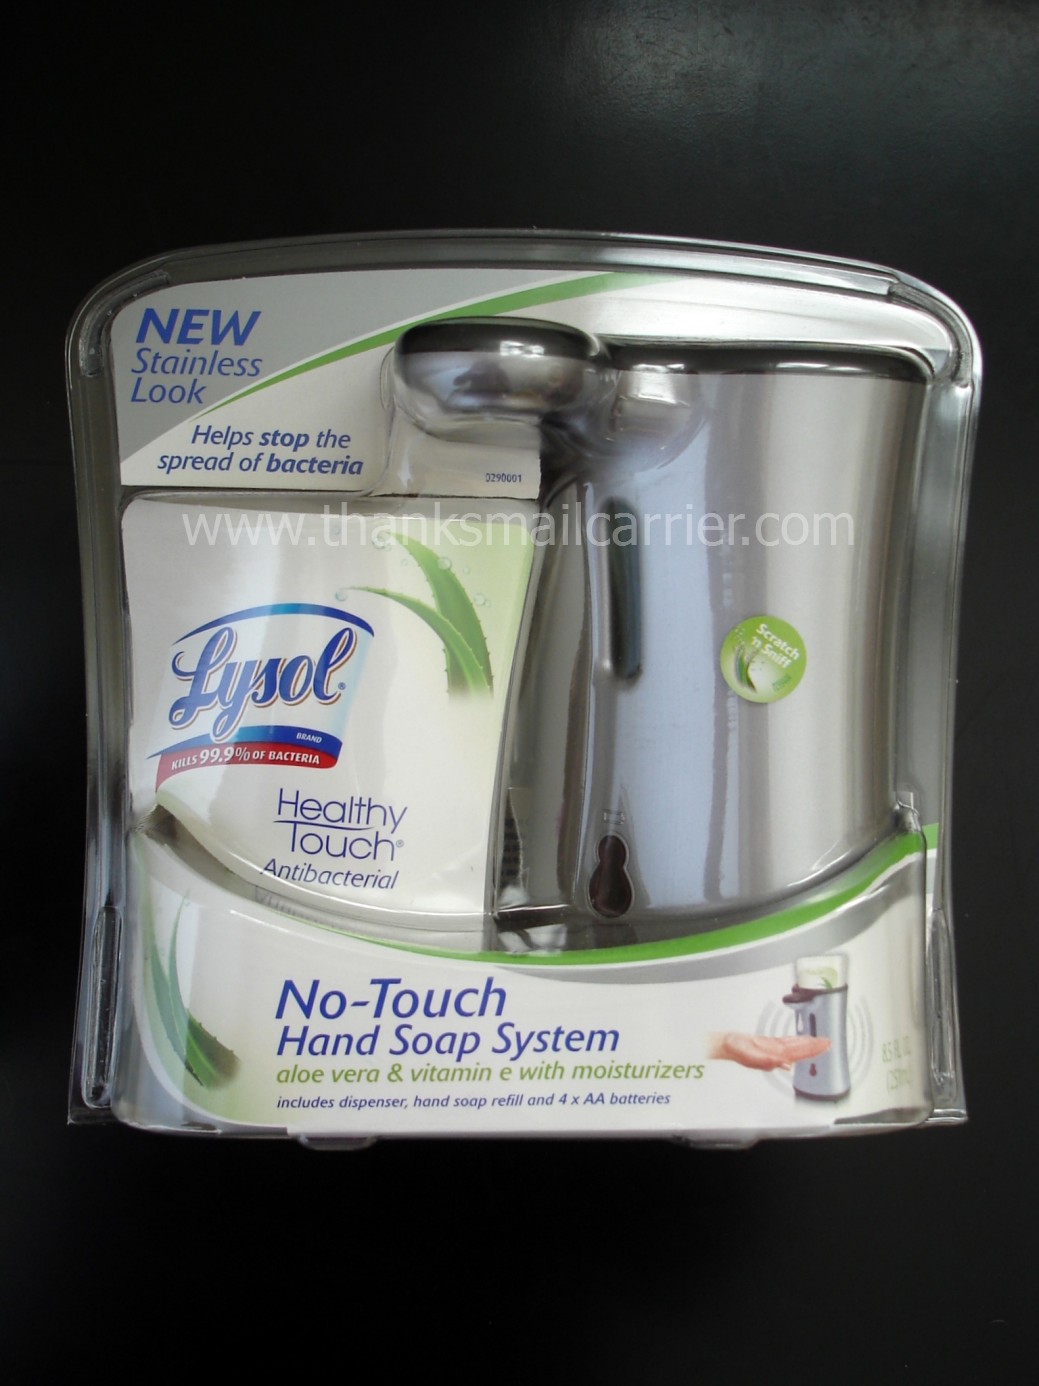 thanks-mail-carrier-lysol-healthy-touch-no-touch-hand-soap-system